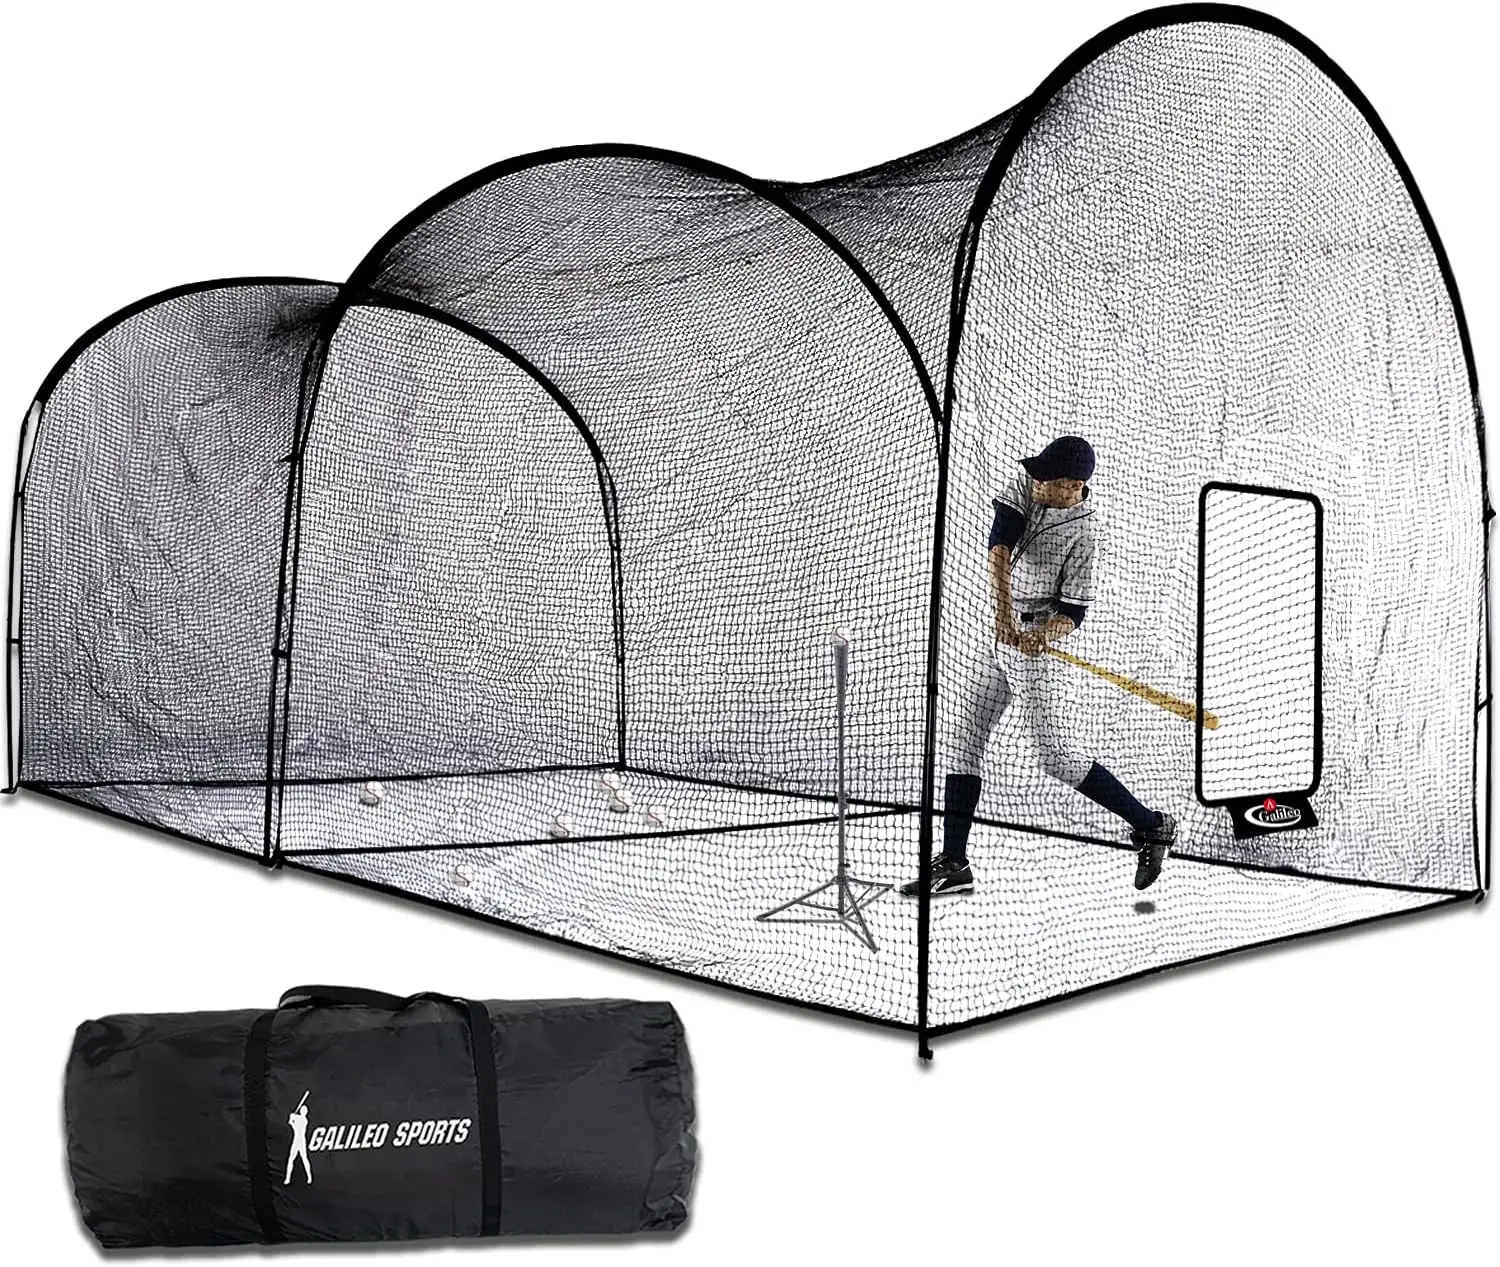 

Cage Baseball Cage Net Softball Cages, Heavy Duty Netting Backstop for Backyard, Training Softball Baseball for Pitching Pitcher